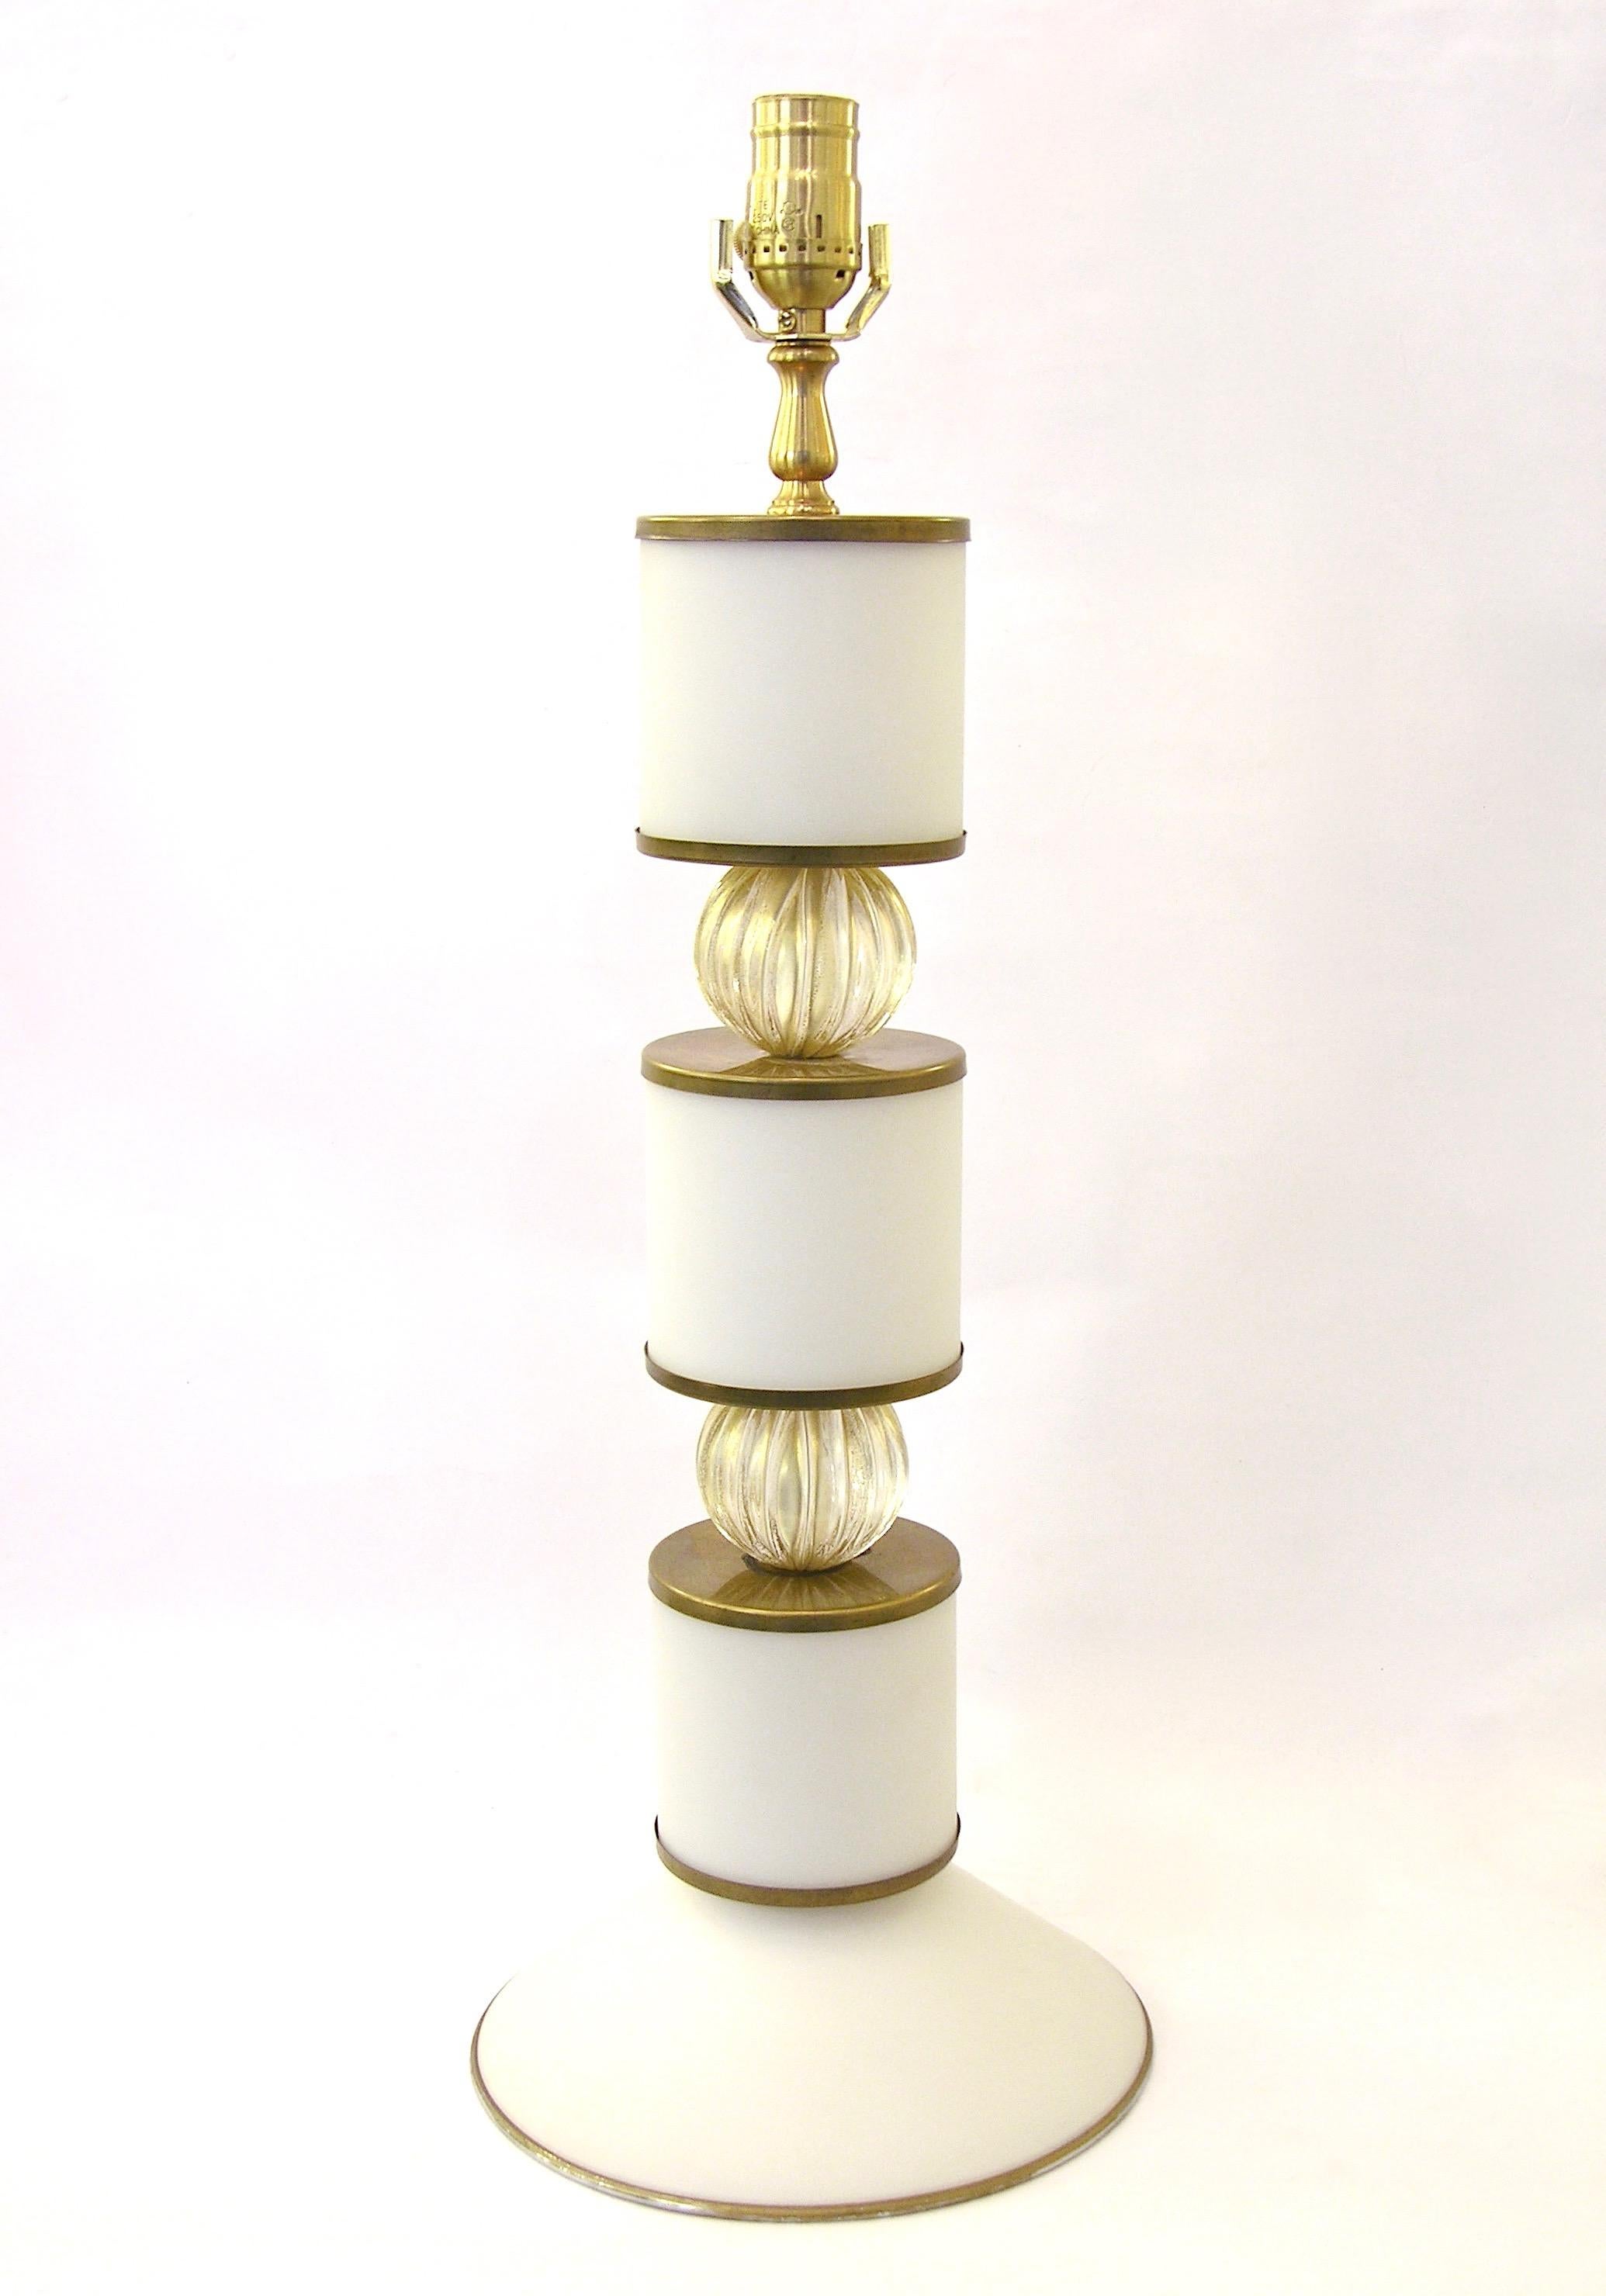 Elegant Italian pair of one-of-a-kind lamps by Albarelli. Chic design, displaying three Murano glass cylinders in opaline matte white with high quality edging in brass, divided by two fluted mouth blown glass spheres worked with pure gold and a